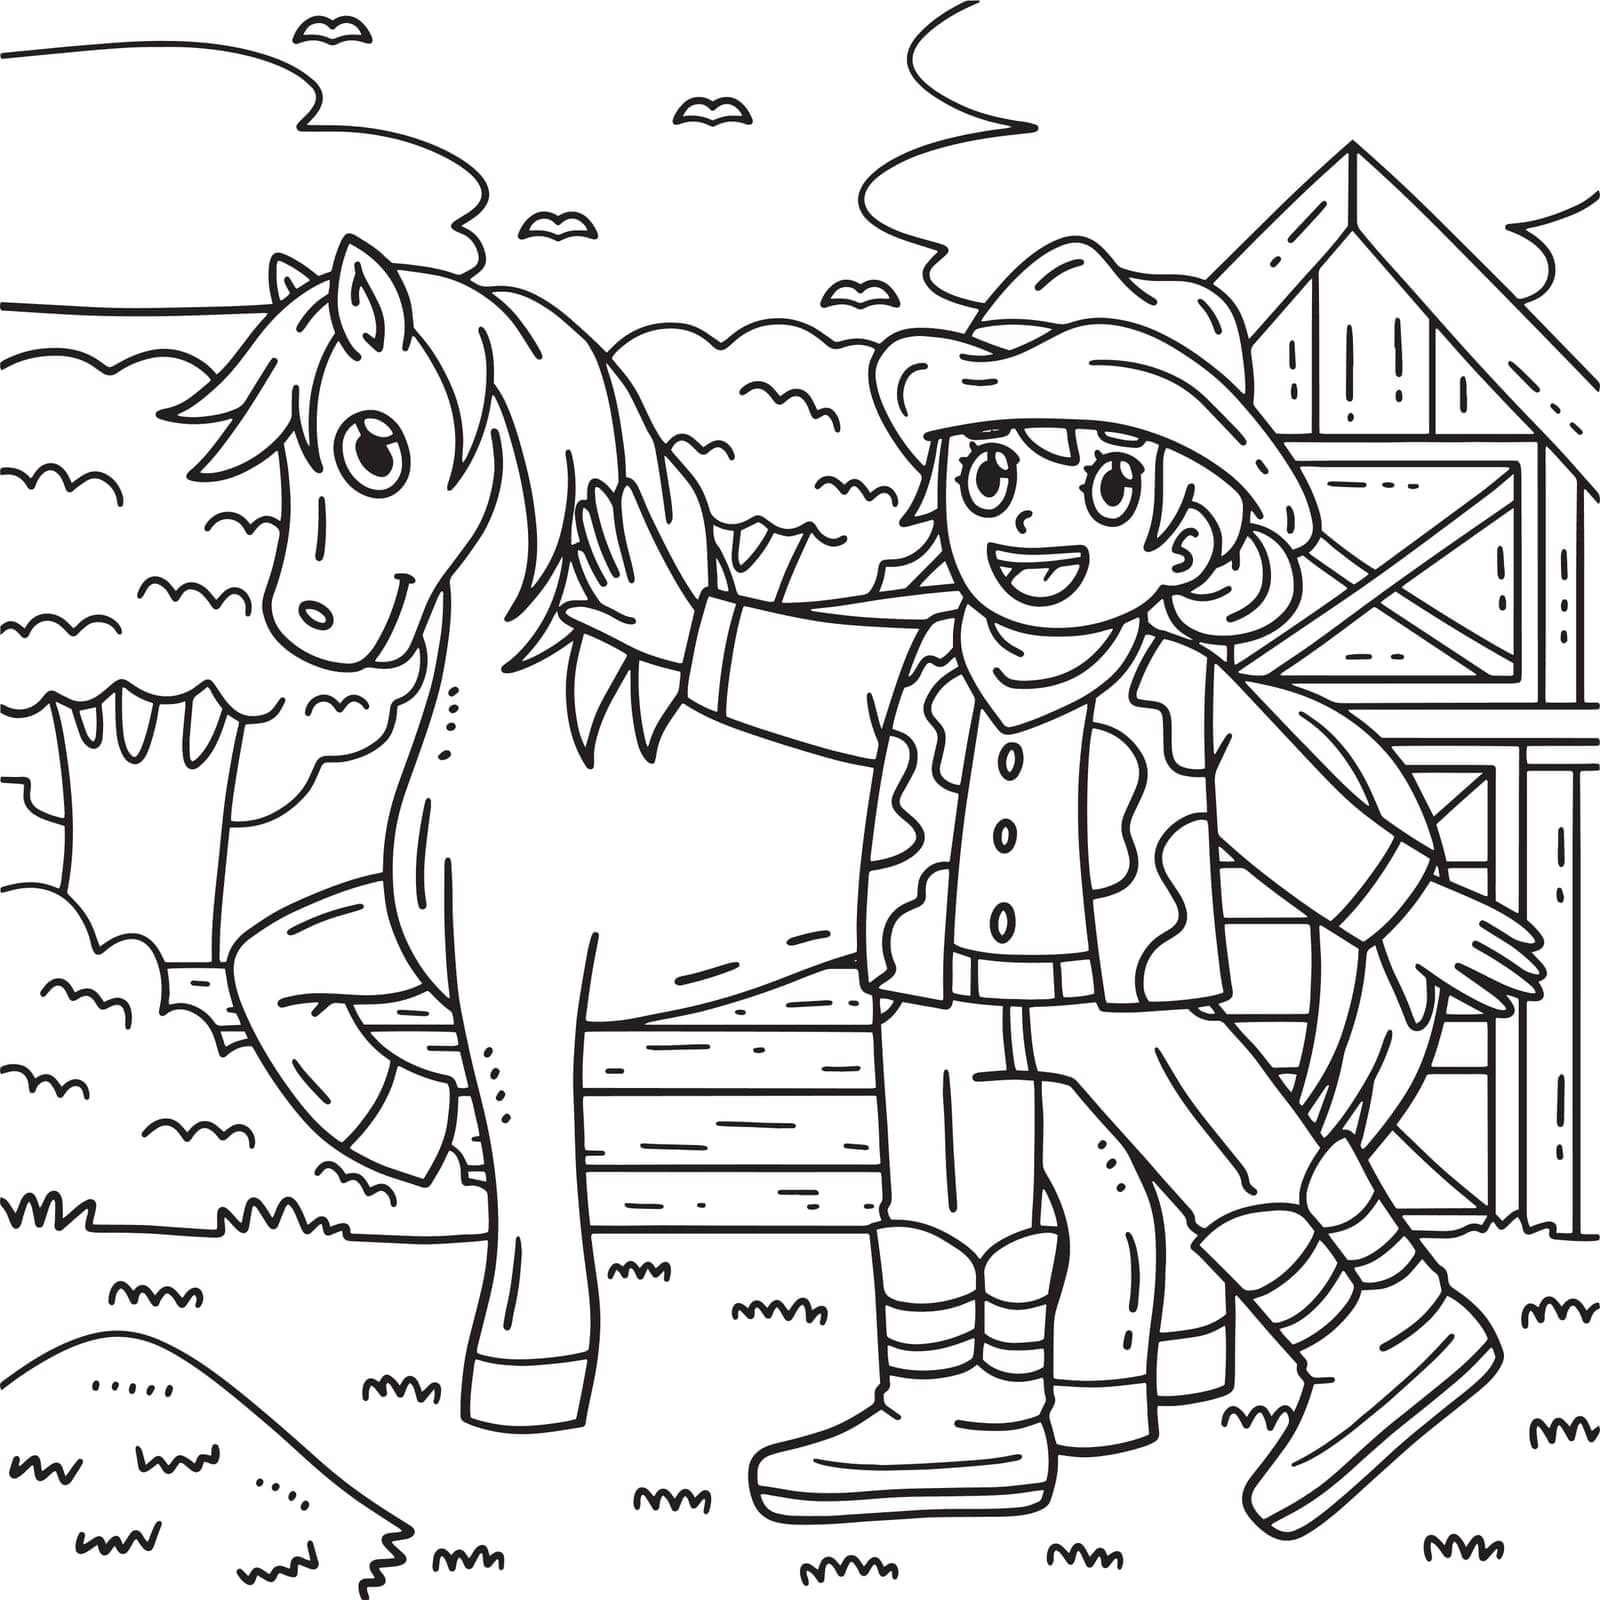 A cute and funny coloring page of a Cowgirl and Pony. Provides hours of coloring fun for children. To color, this page is very easy. Suitable for little kids and toddlers.